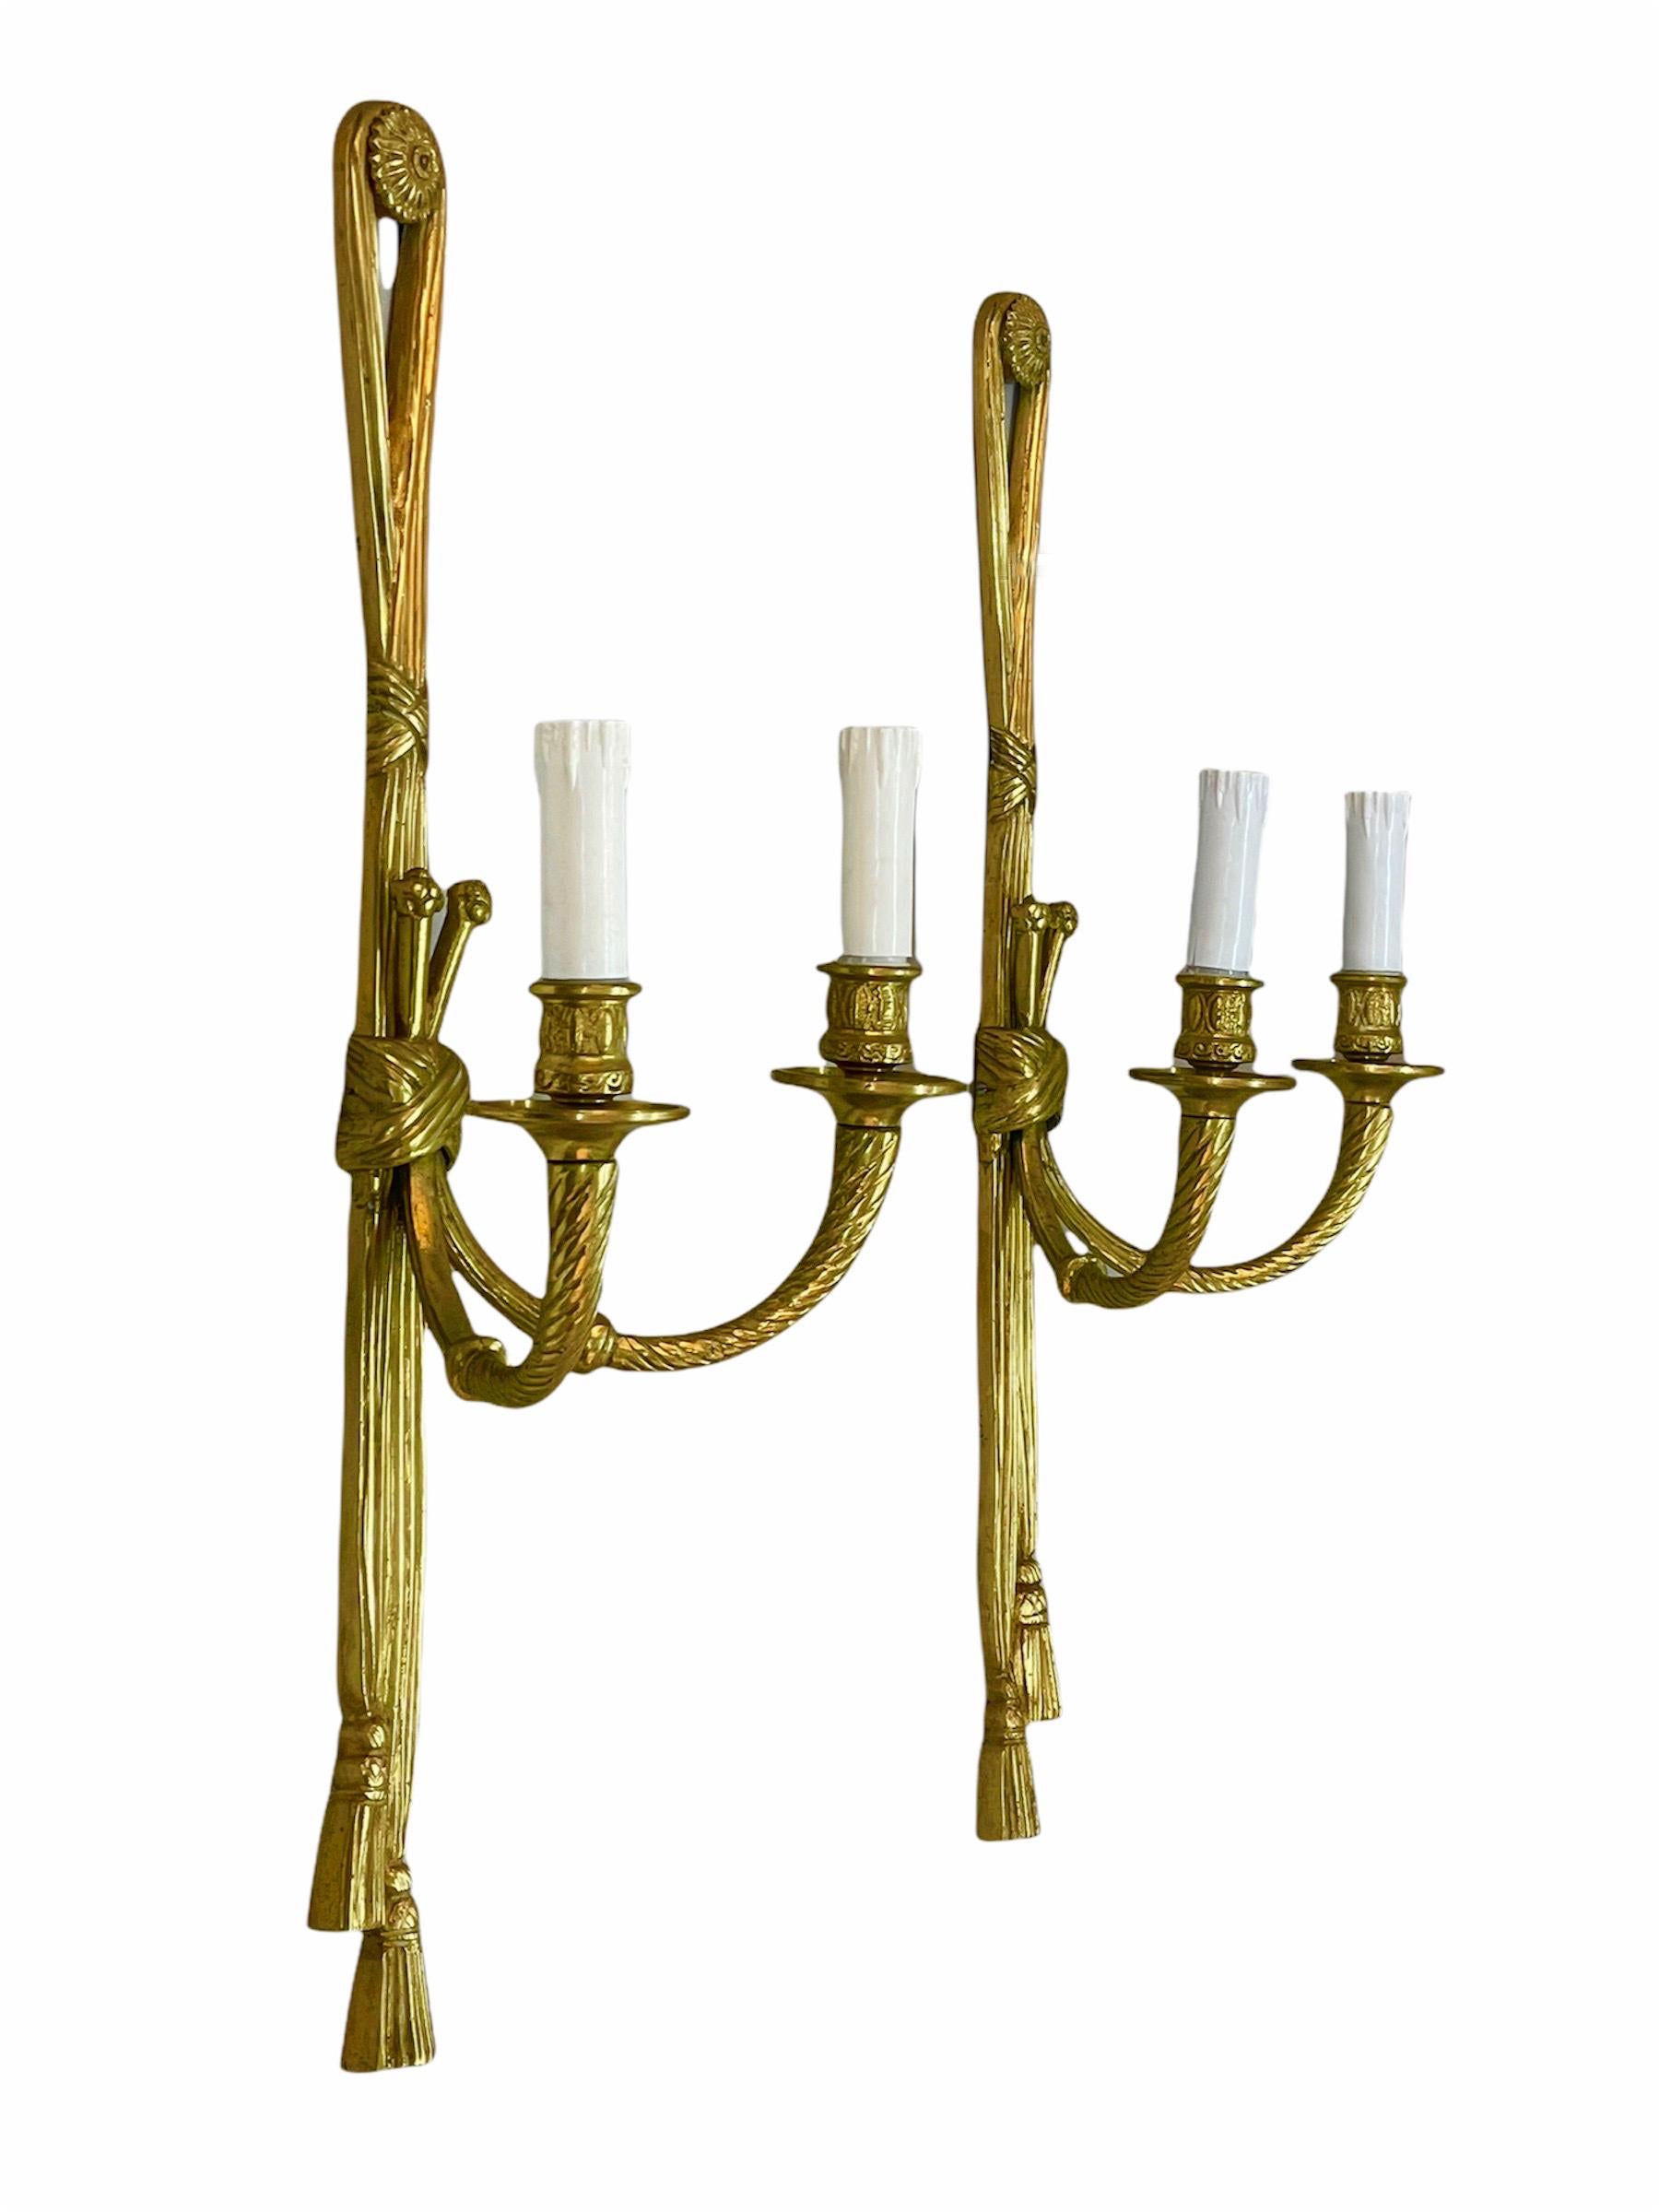 Pair of 19th Century Louis XVI Style Knot & Tassel Appliqué Wall Candle Sconces For Sale 7